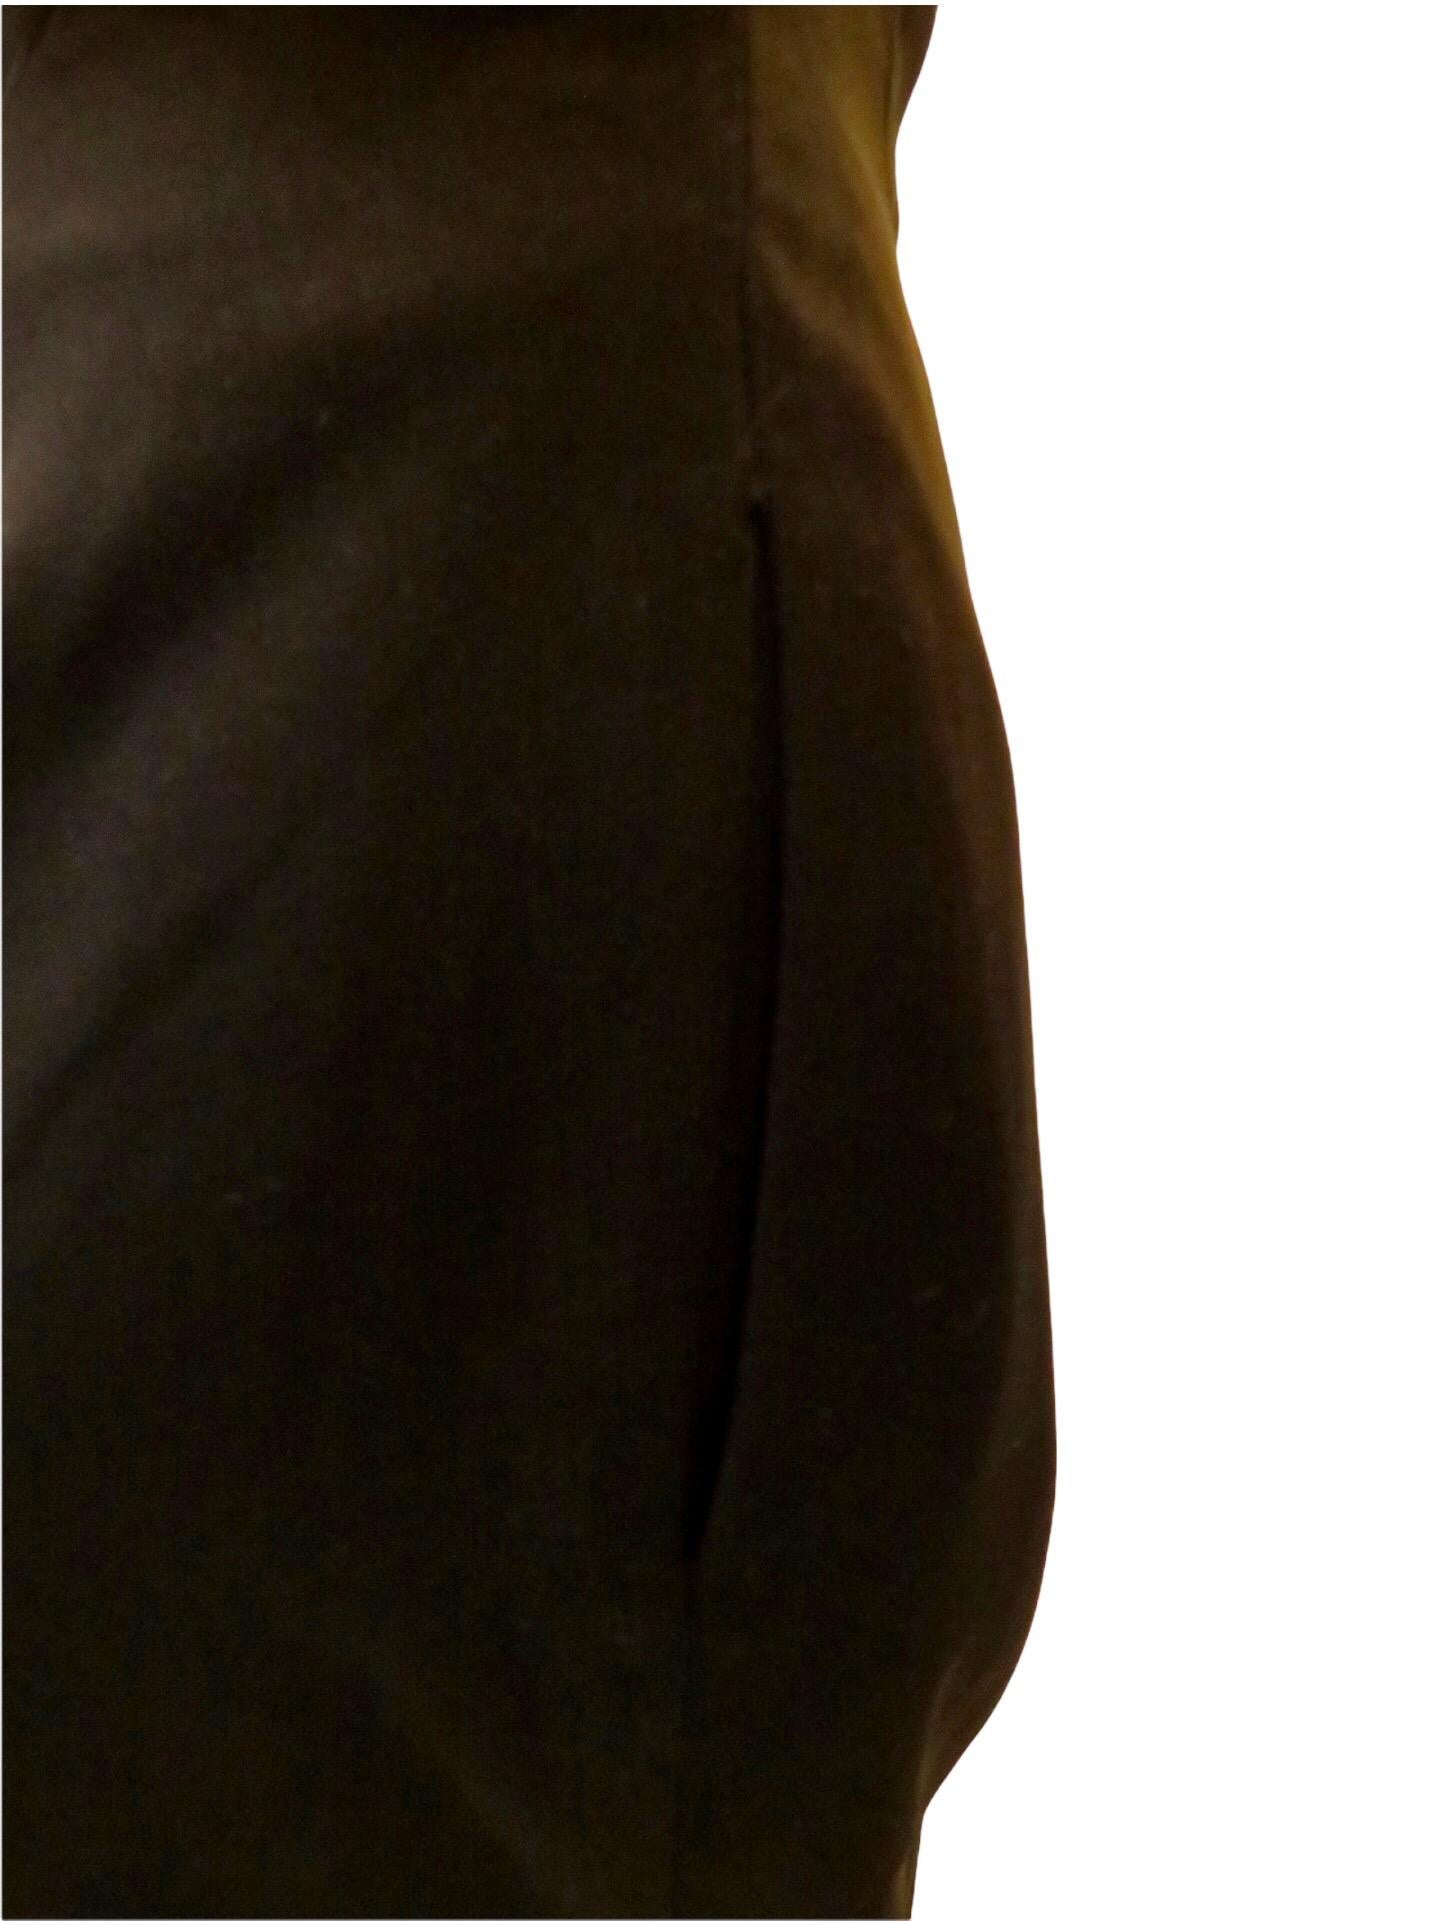 Black Chantal Thomass High-waisted Belted Pencil Skirt For Sale